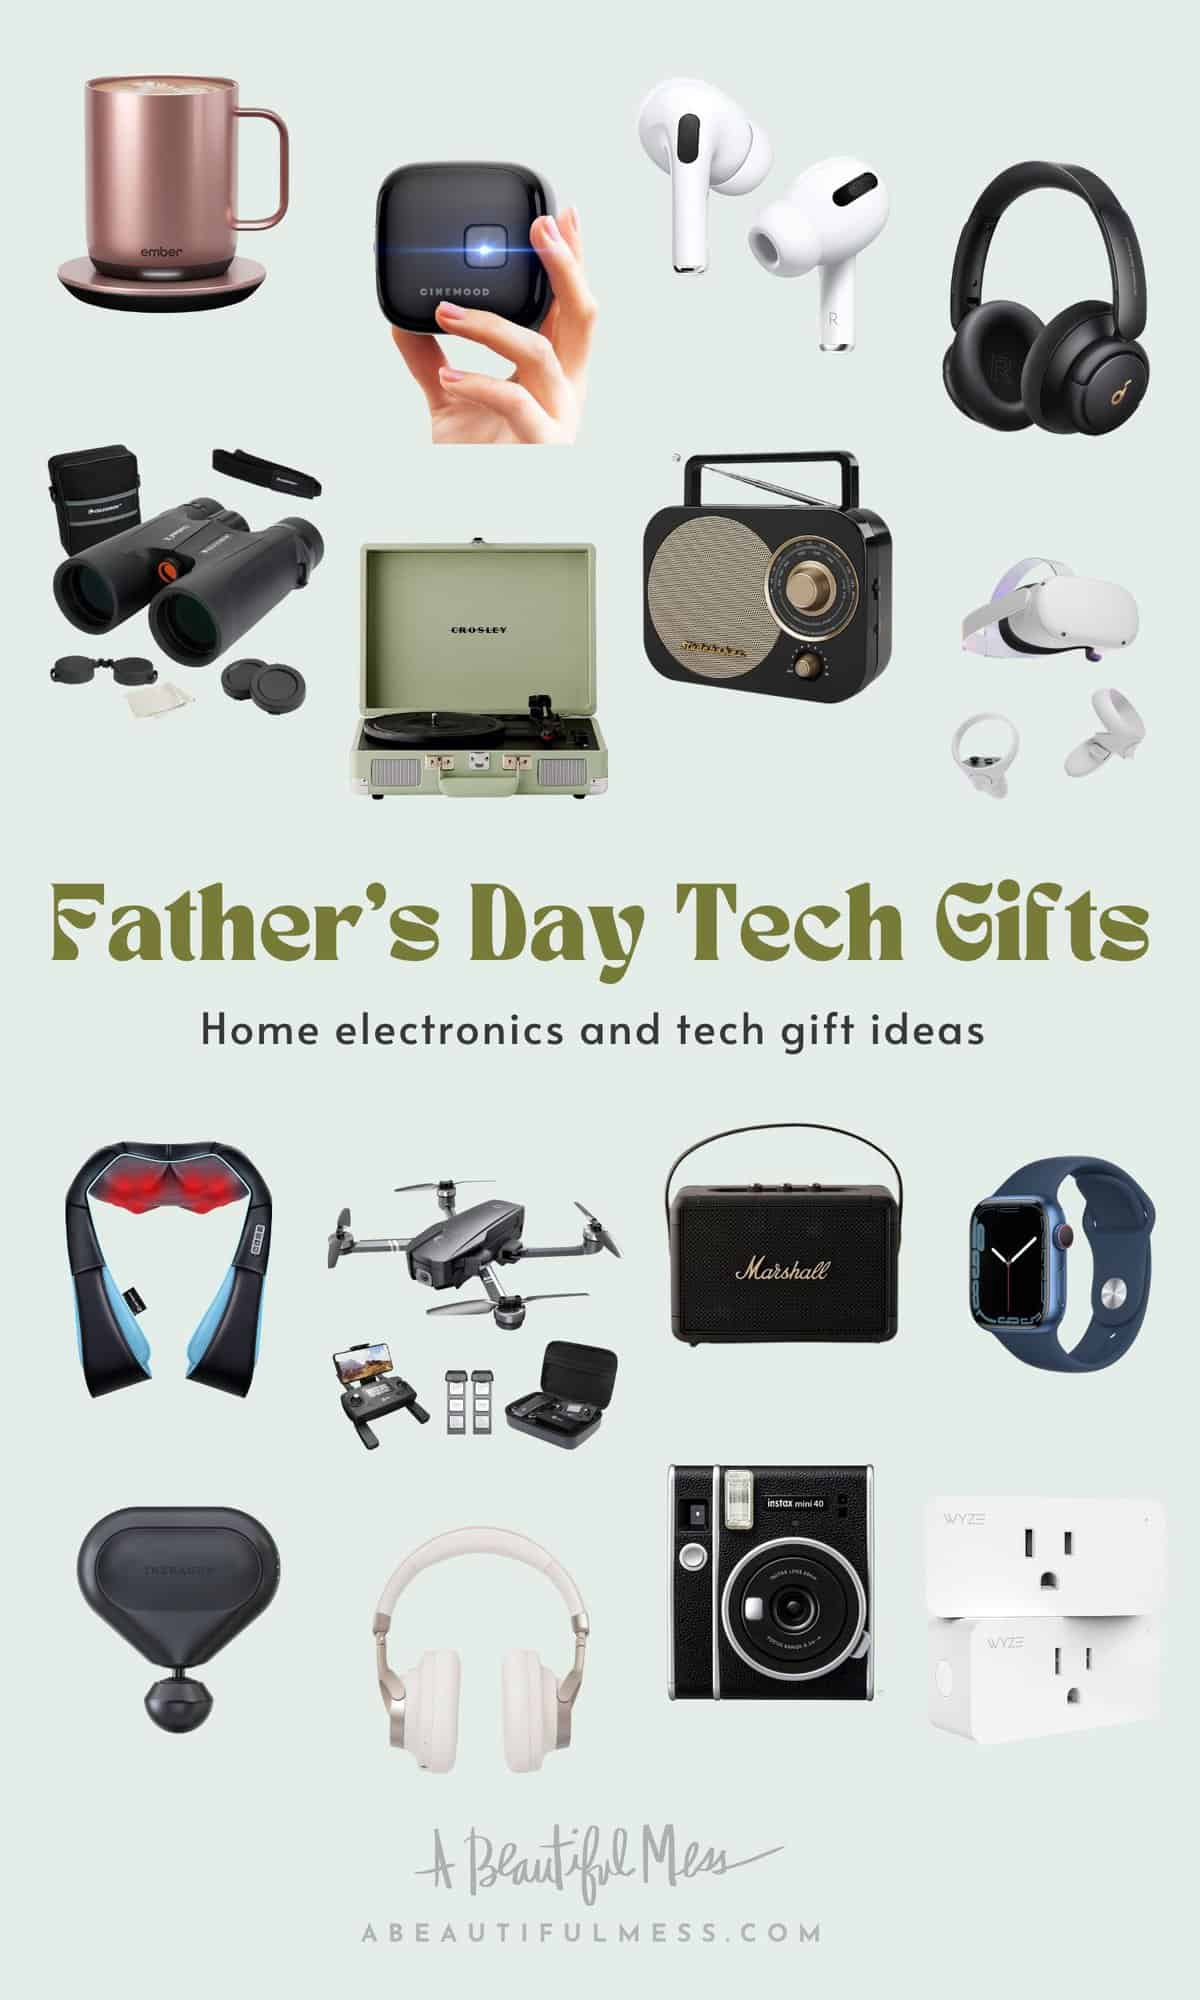 https://abeautifulmess.com/wp-content/uploads/2022/06/Tech-gifts-for-Fathers-Day.jpg